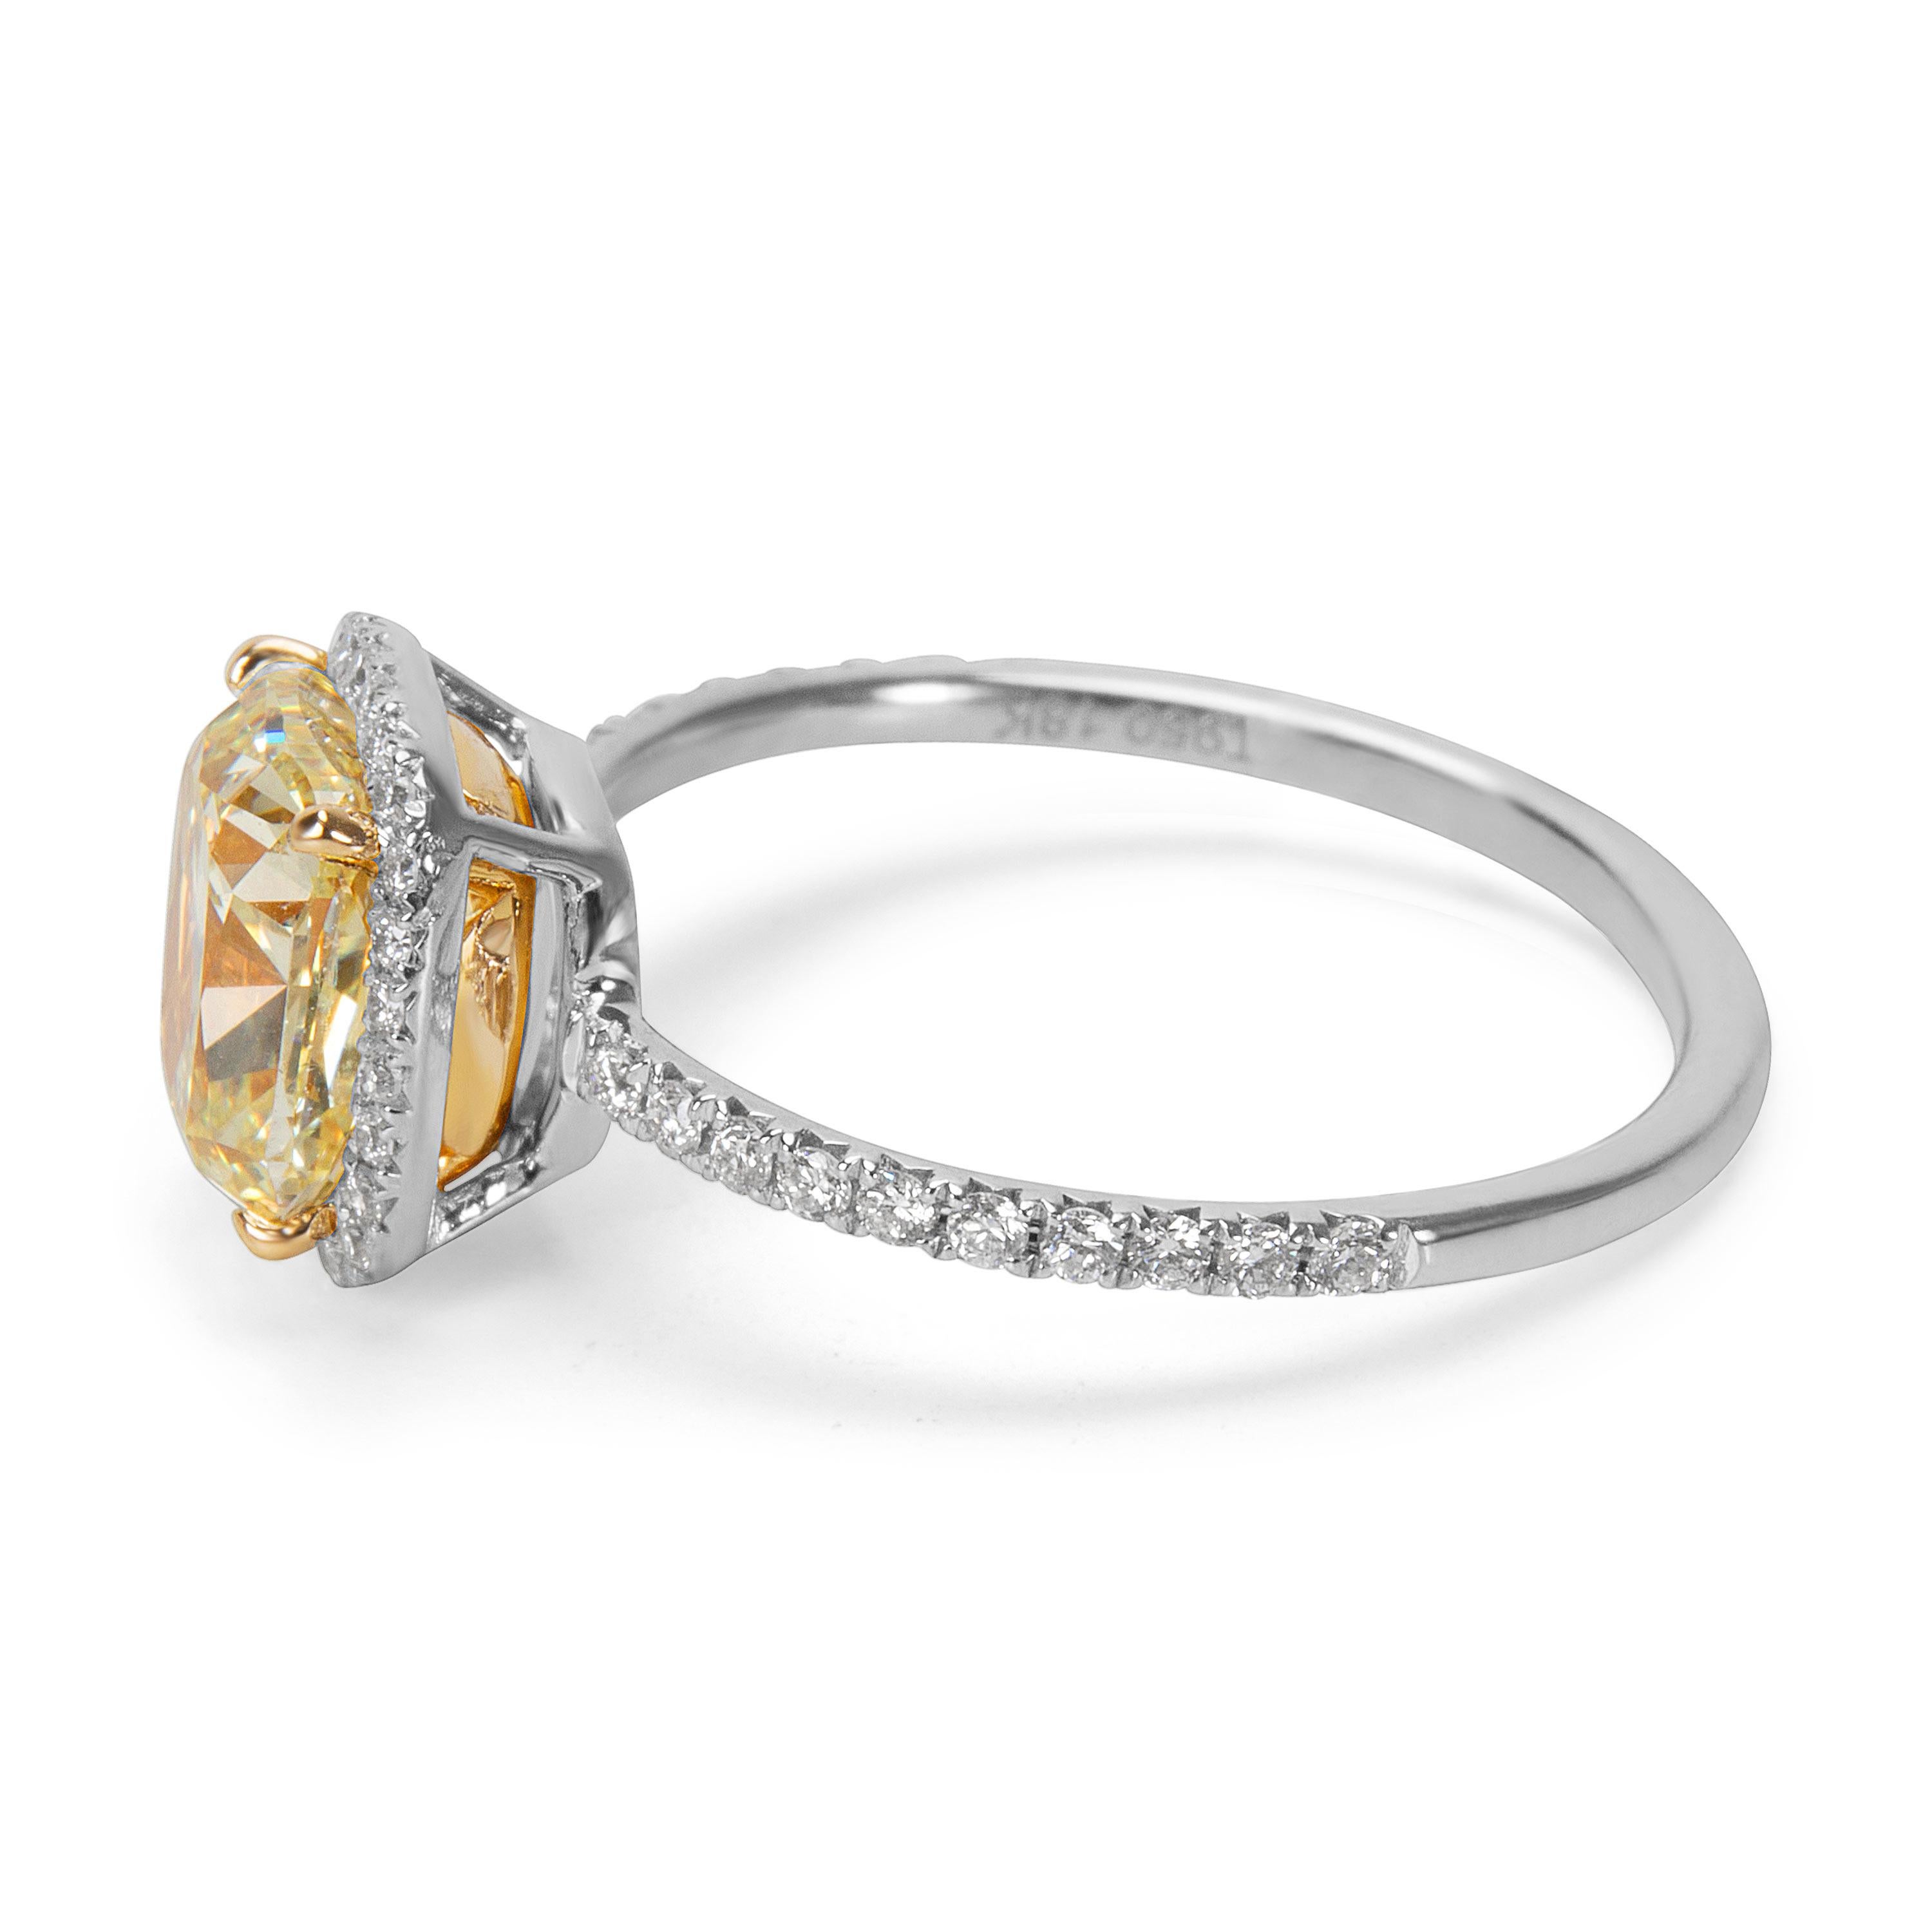 Brand new and unworn. GIA Certified. 2.15 carat Fancy Light Yellow cushion cut diamond with diamond halo in 18K yellow gold and platinum.

Center Stone  Type	        Diamond
Center Stone Weight  (cts)	2.15
Center Stone  Shape	        Cushion
Center